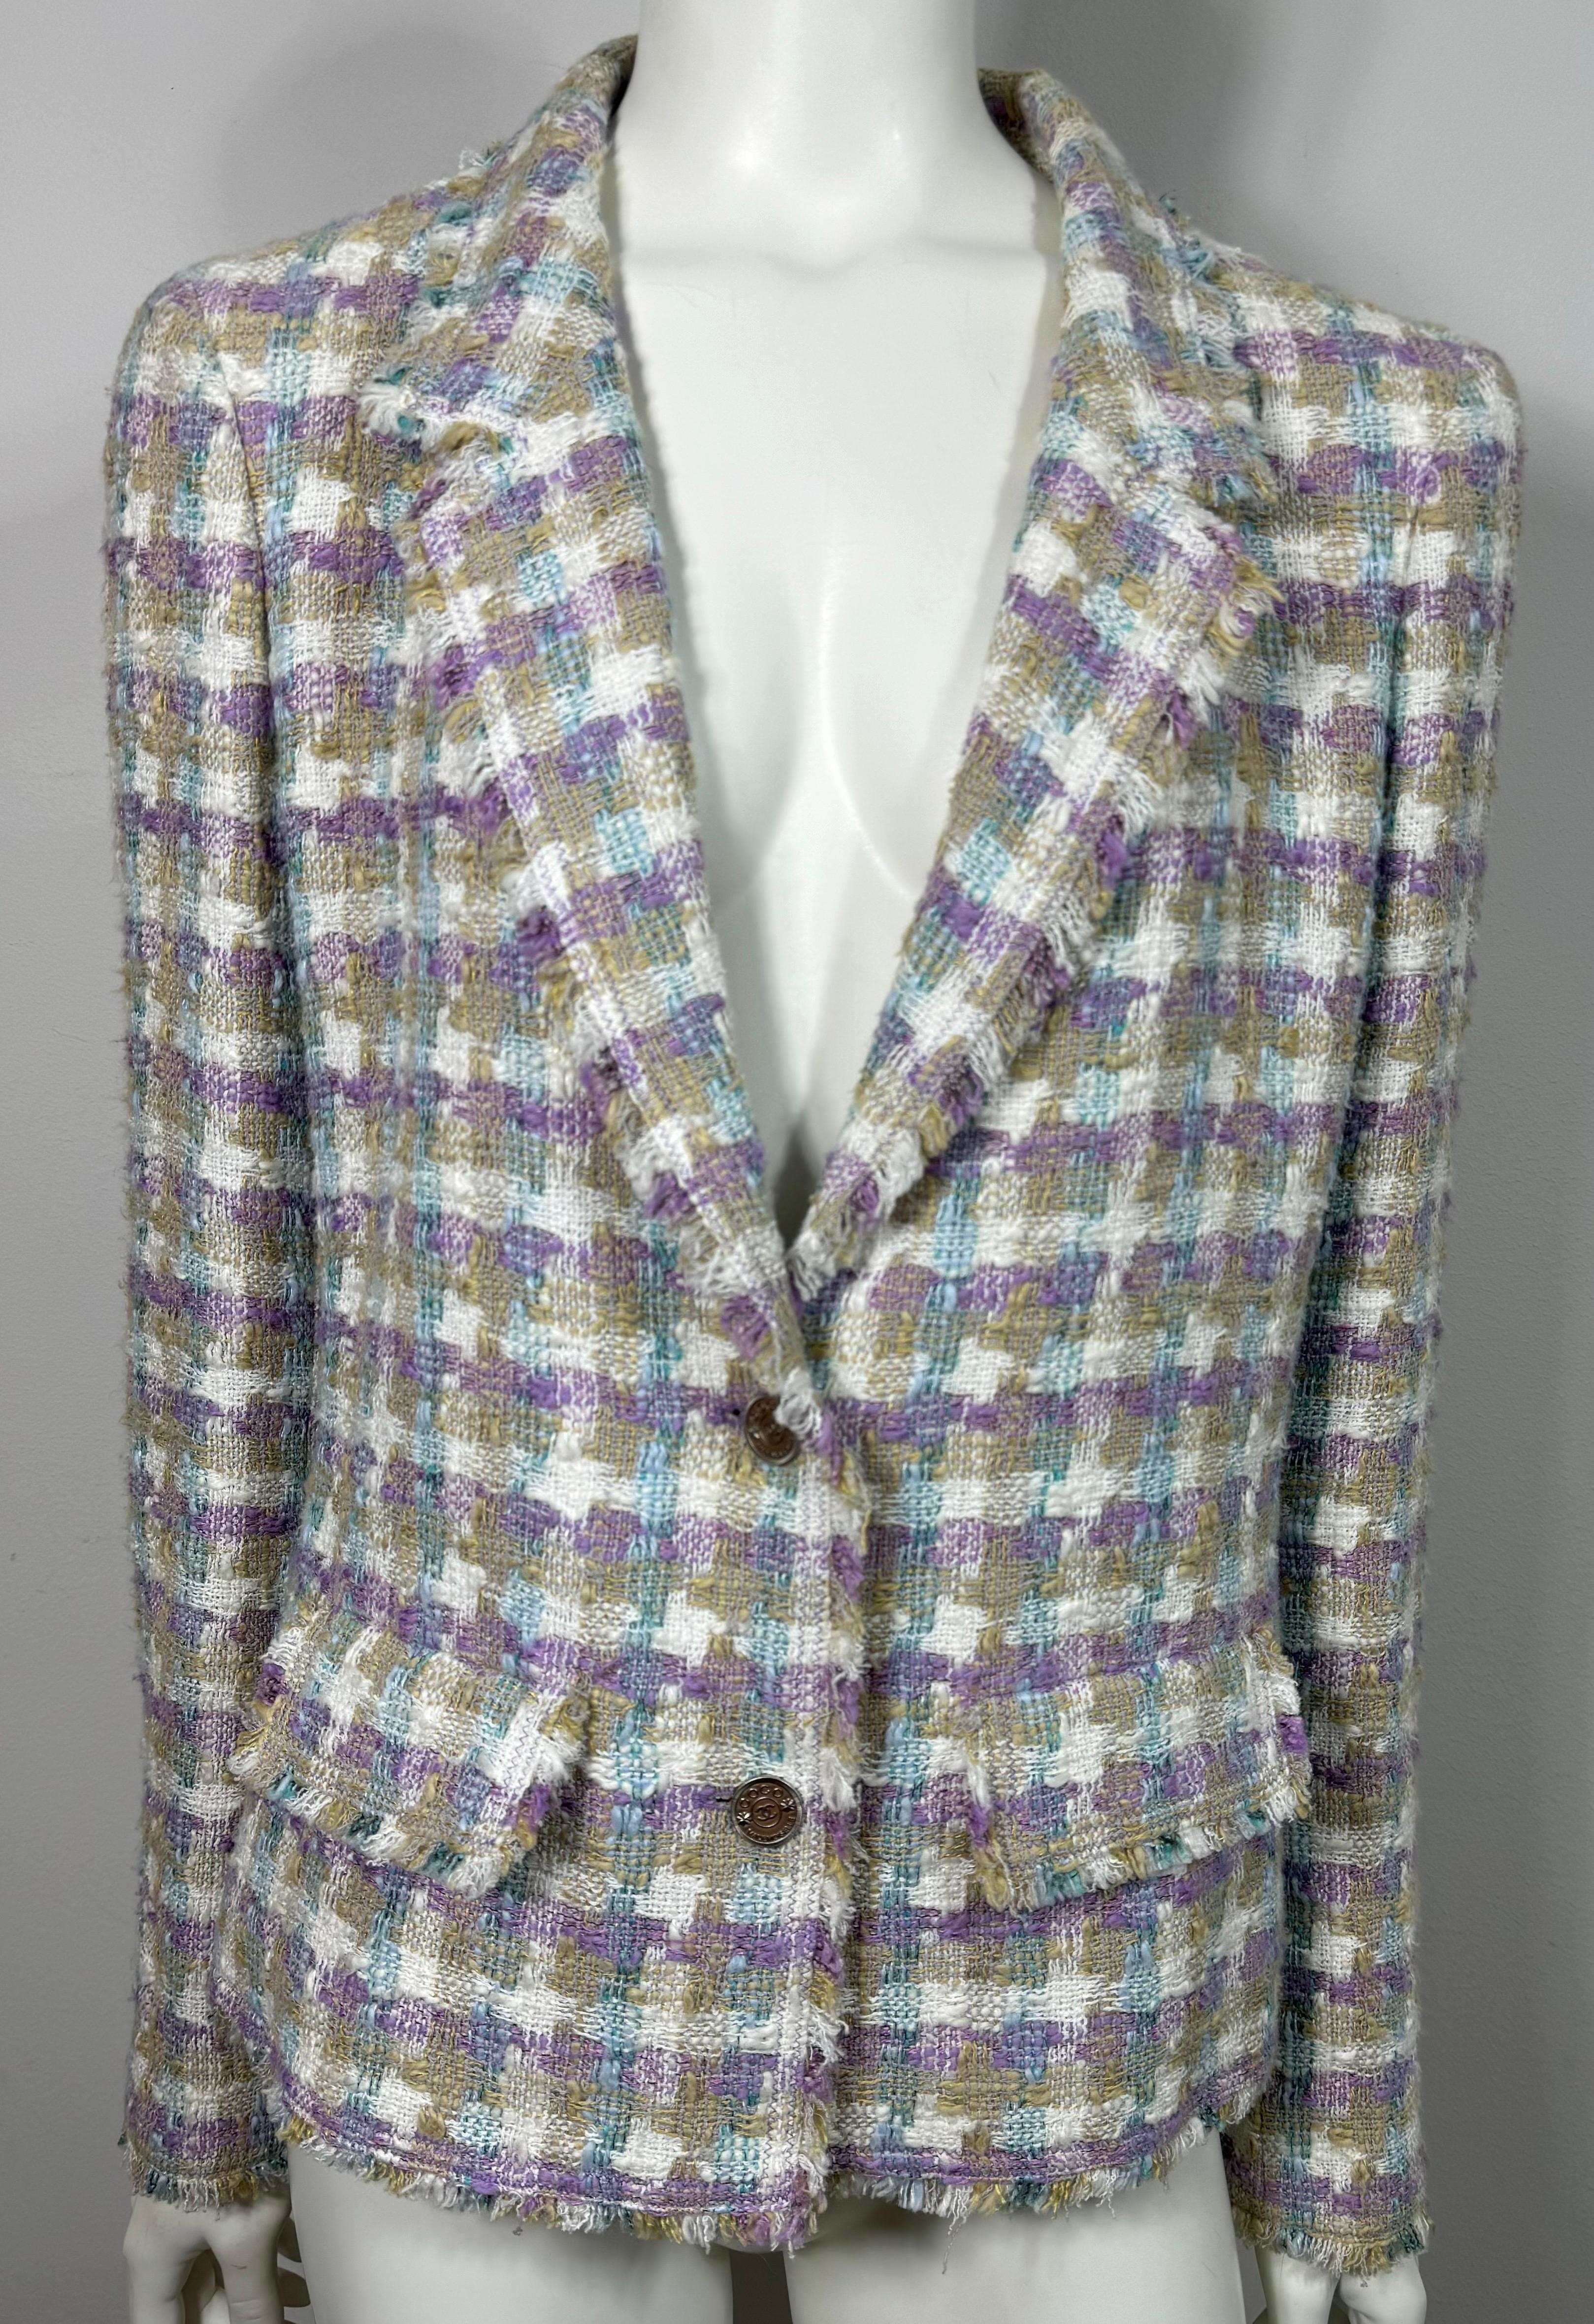 Chanel Spring 2005 Multi Pastel Tweed Single Breasted Jacket-Size 44 For Sale 7